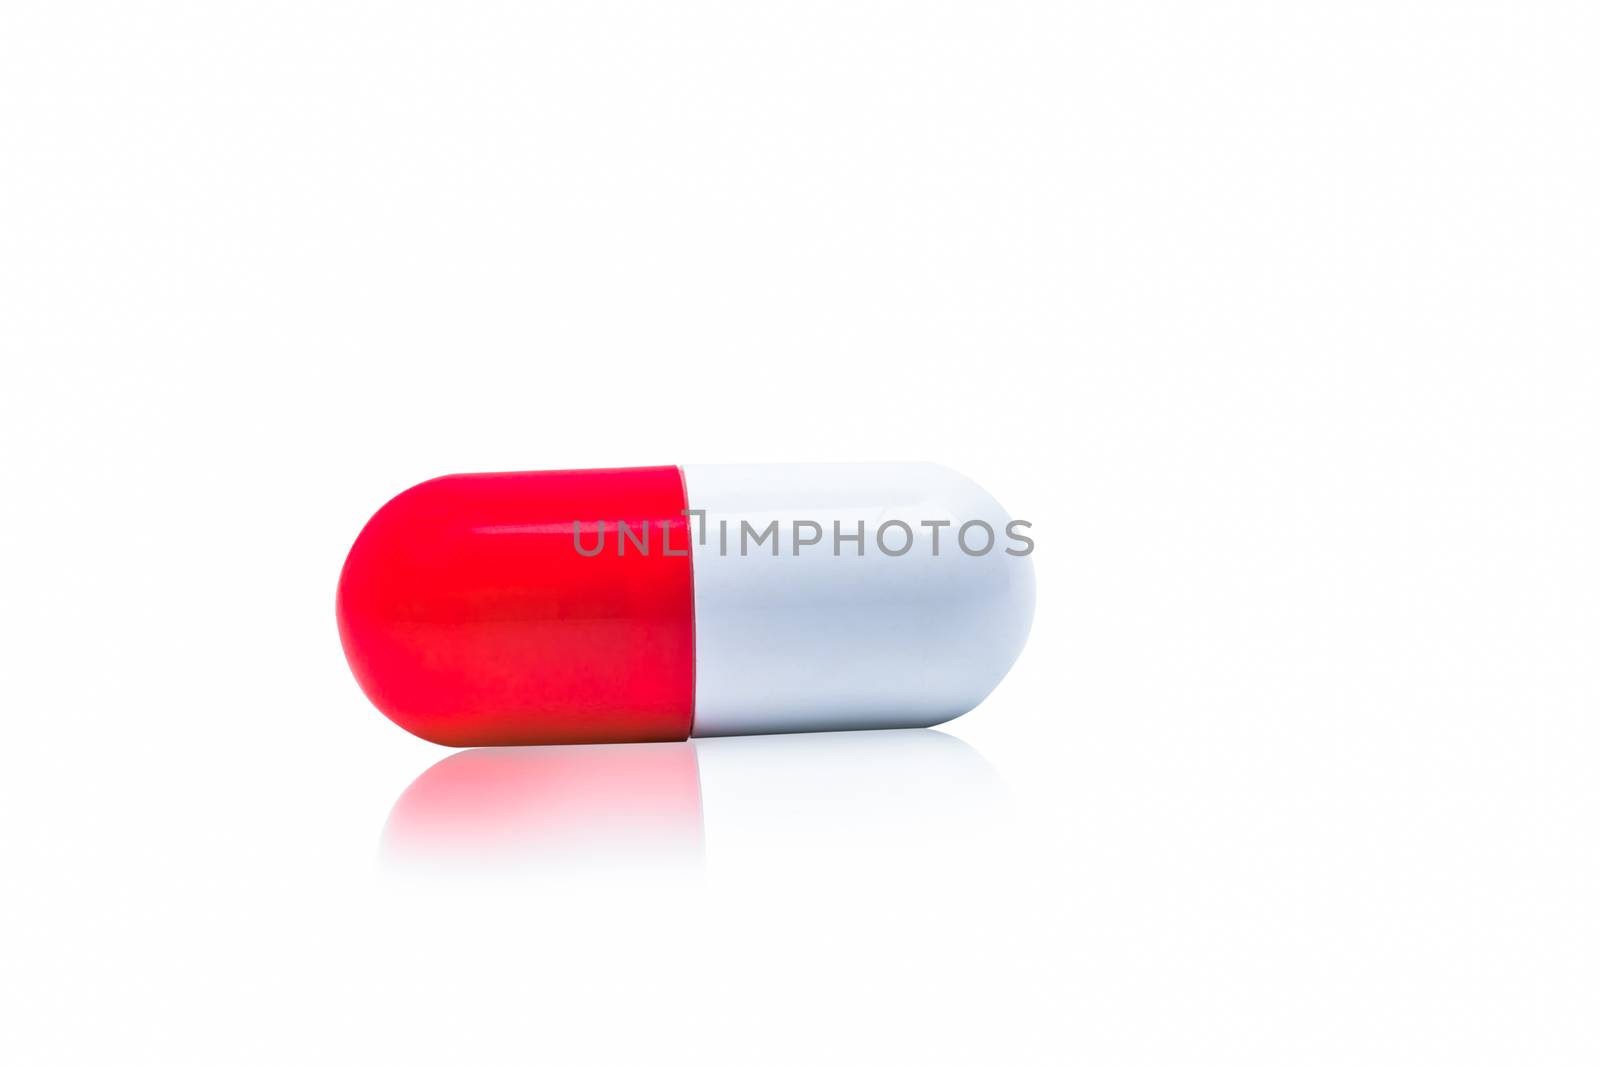 Red, white capsule pills isolated on white background with shadow and copy space for text. Drug resistance concept. Antibiotics drug use with reasonable and global healthcare concept. Pharmacy sign and symbol. Pharmaceutical industry. Pharmacy background. Antibiotic or antimicrobial drug resistance. Health budgets and policy.